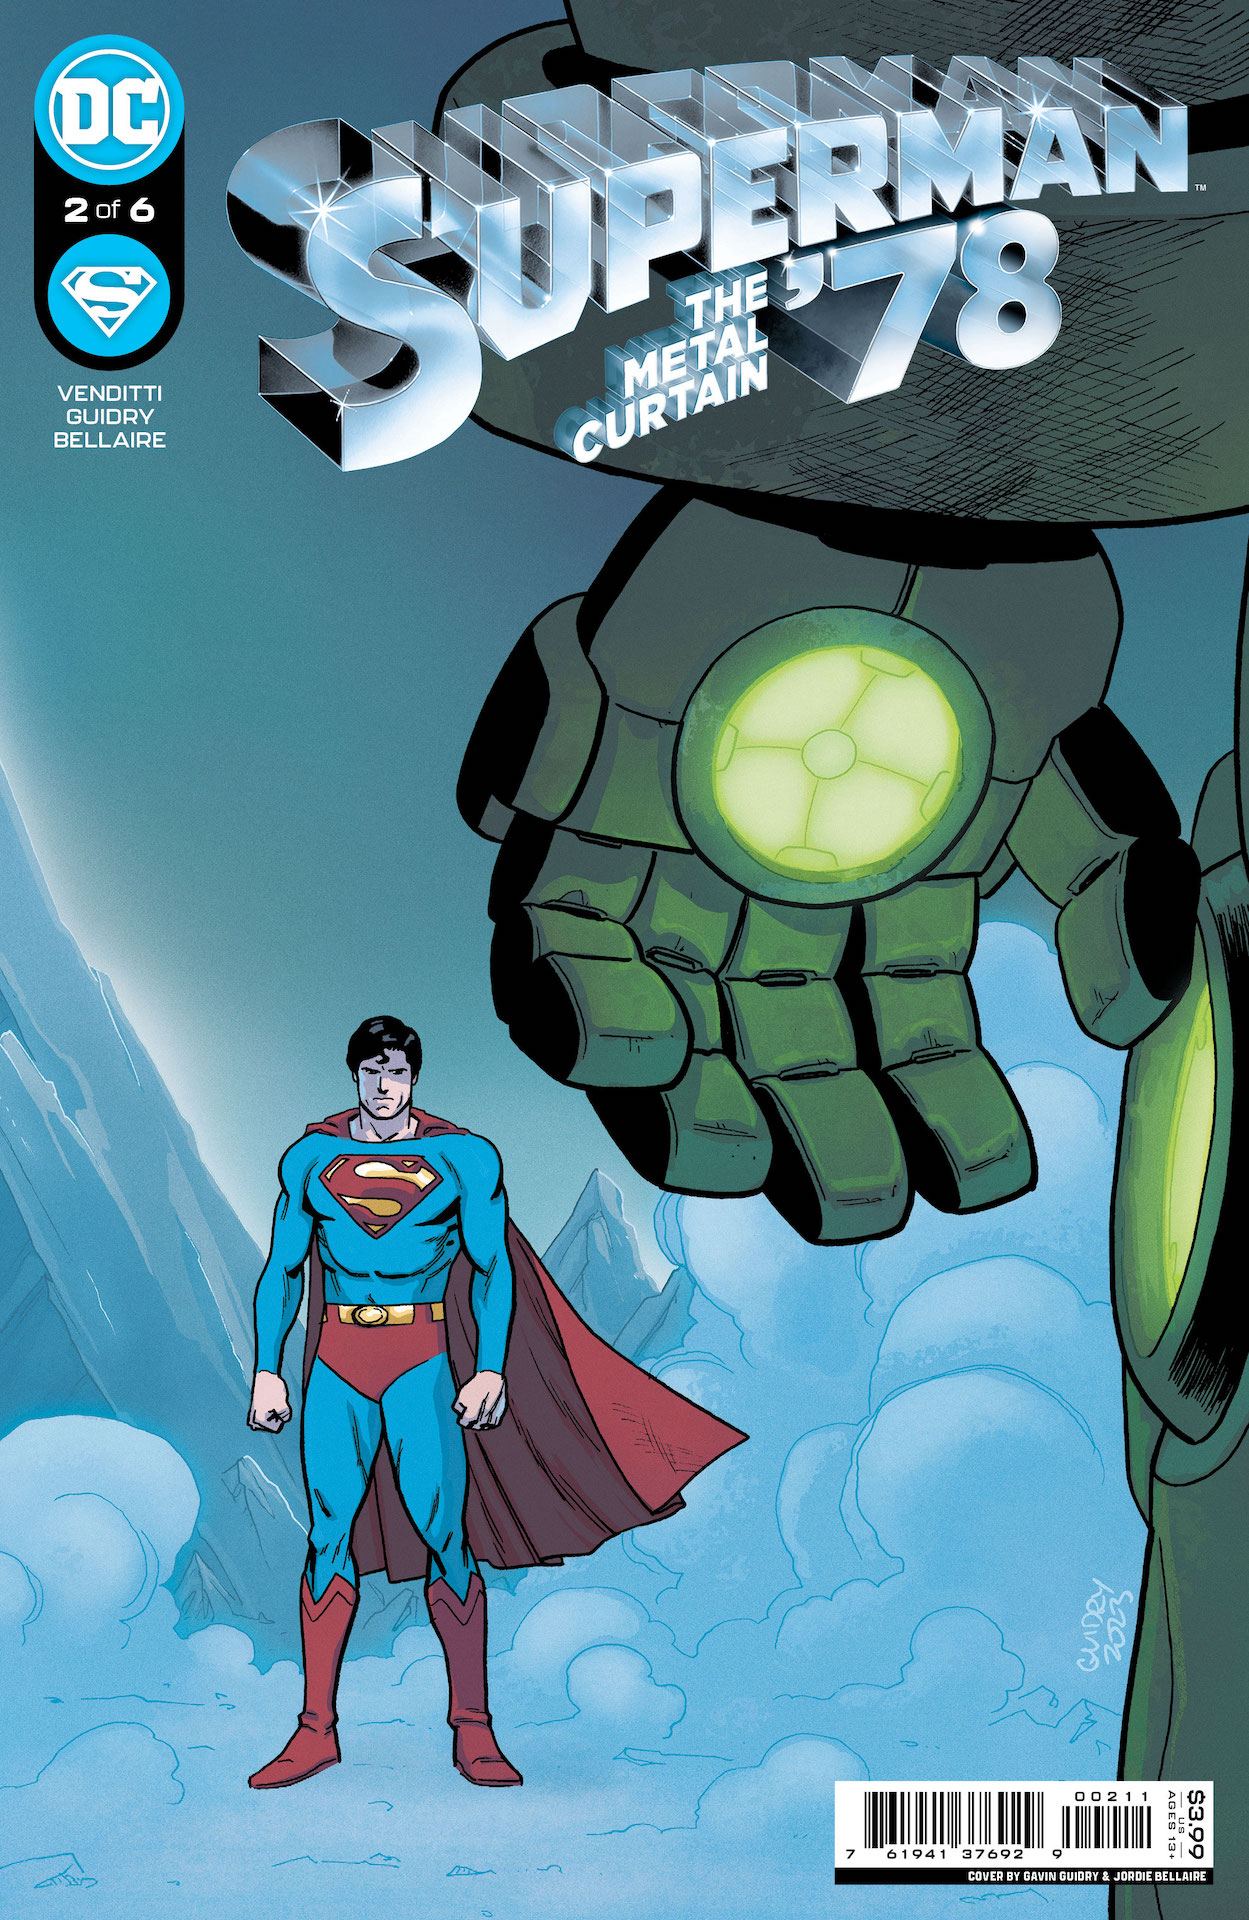 DC Preview: Superman '78: The Metal Curtain #2